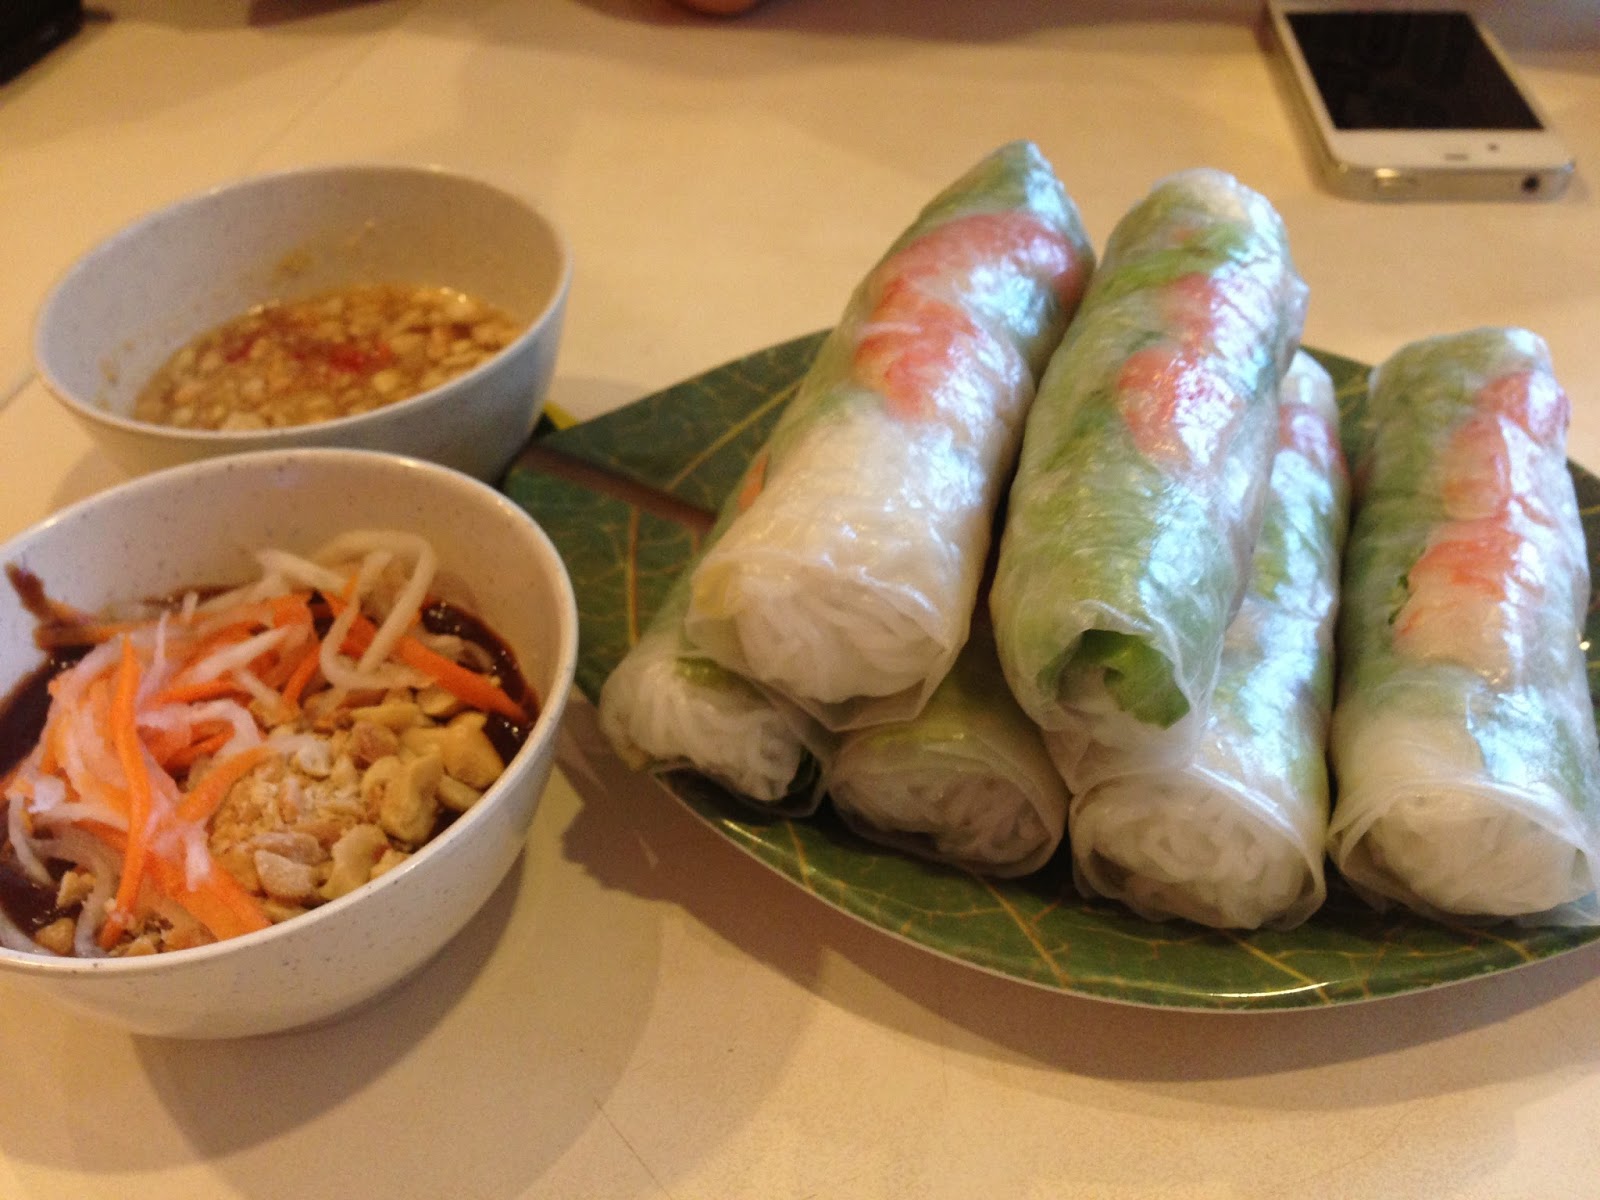 WenWen: Our review : Long Phung Restaurant - Vietnamese Food